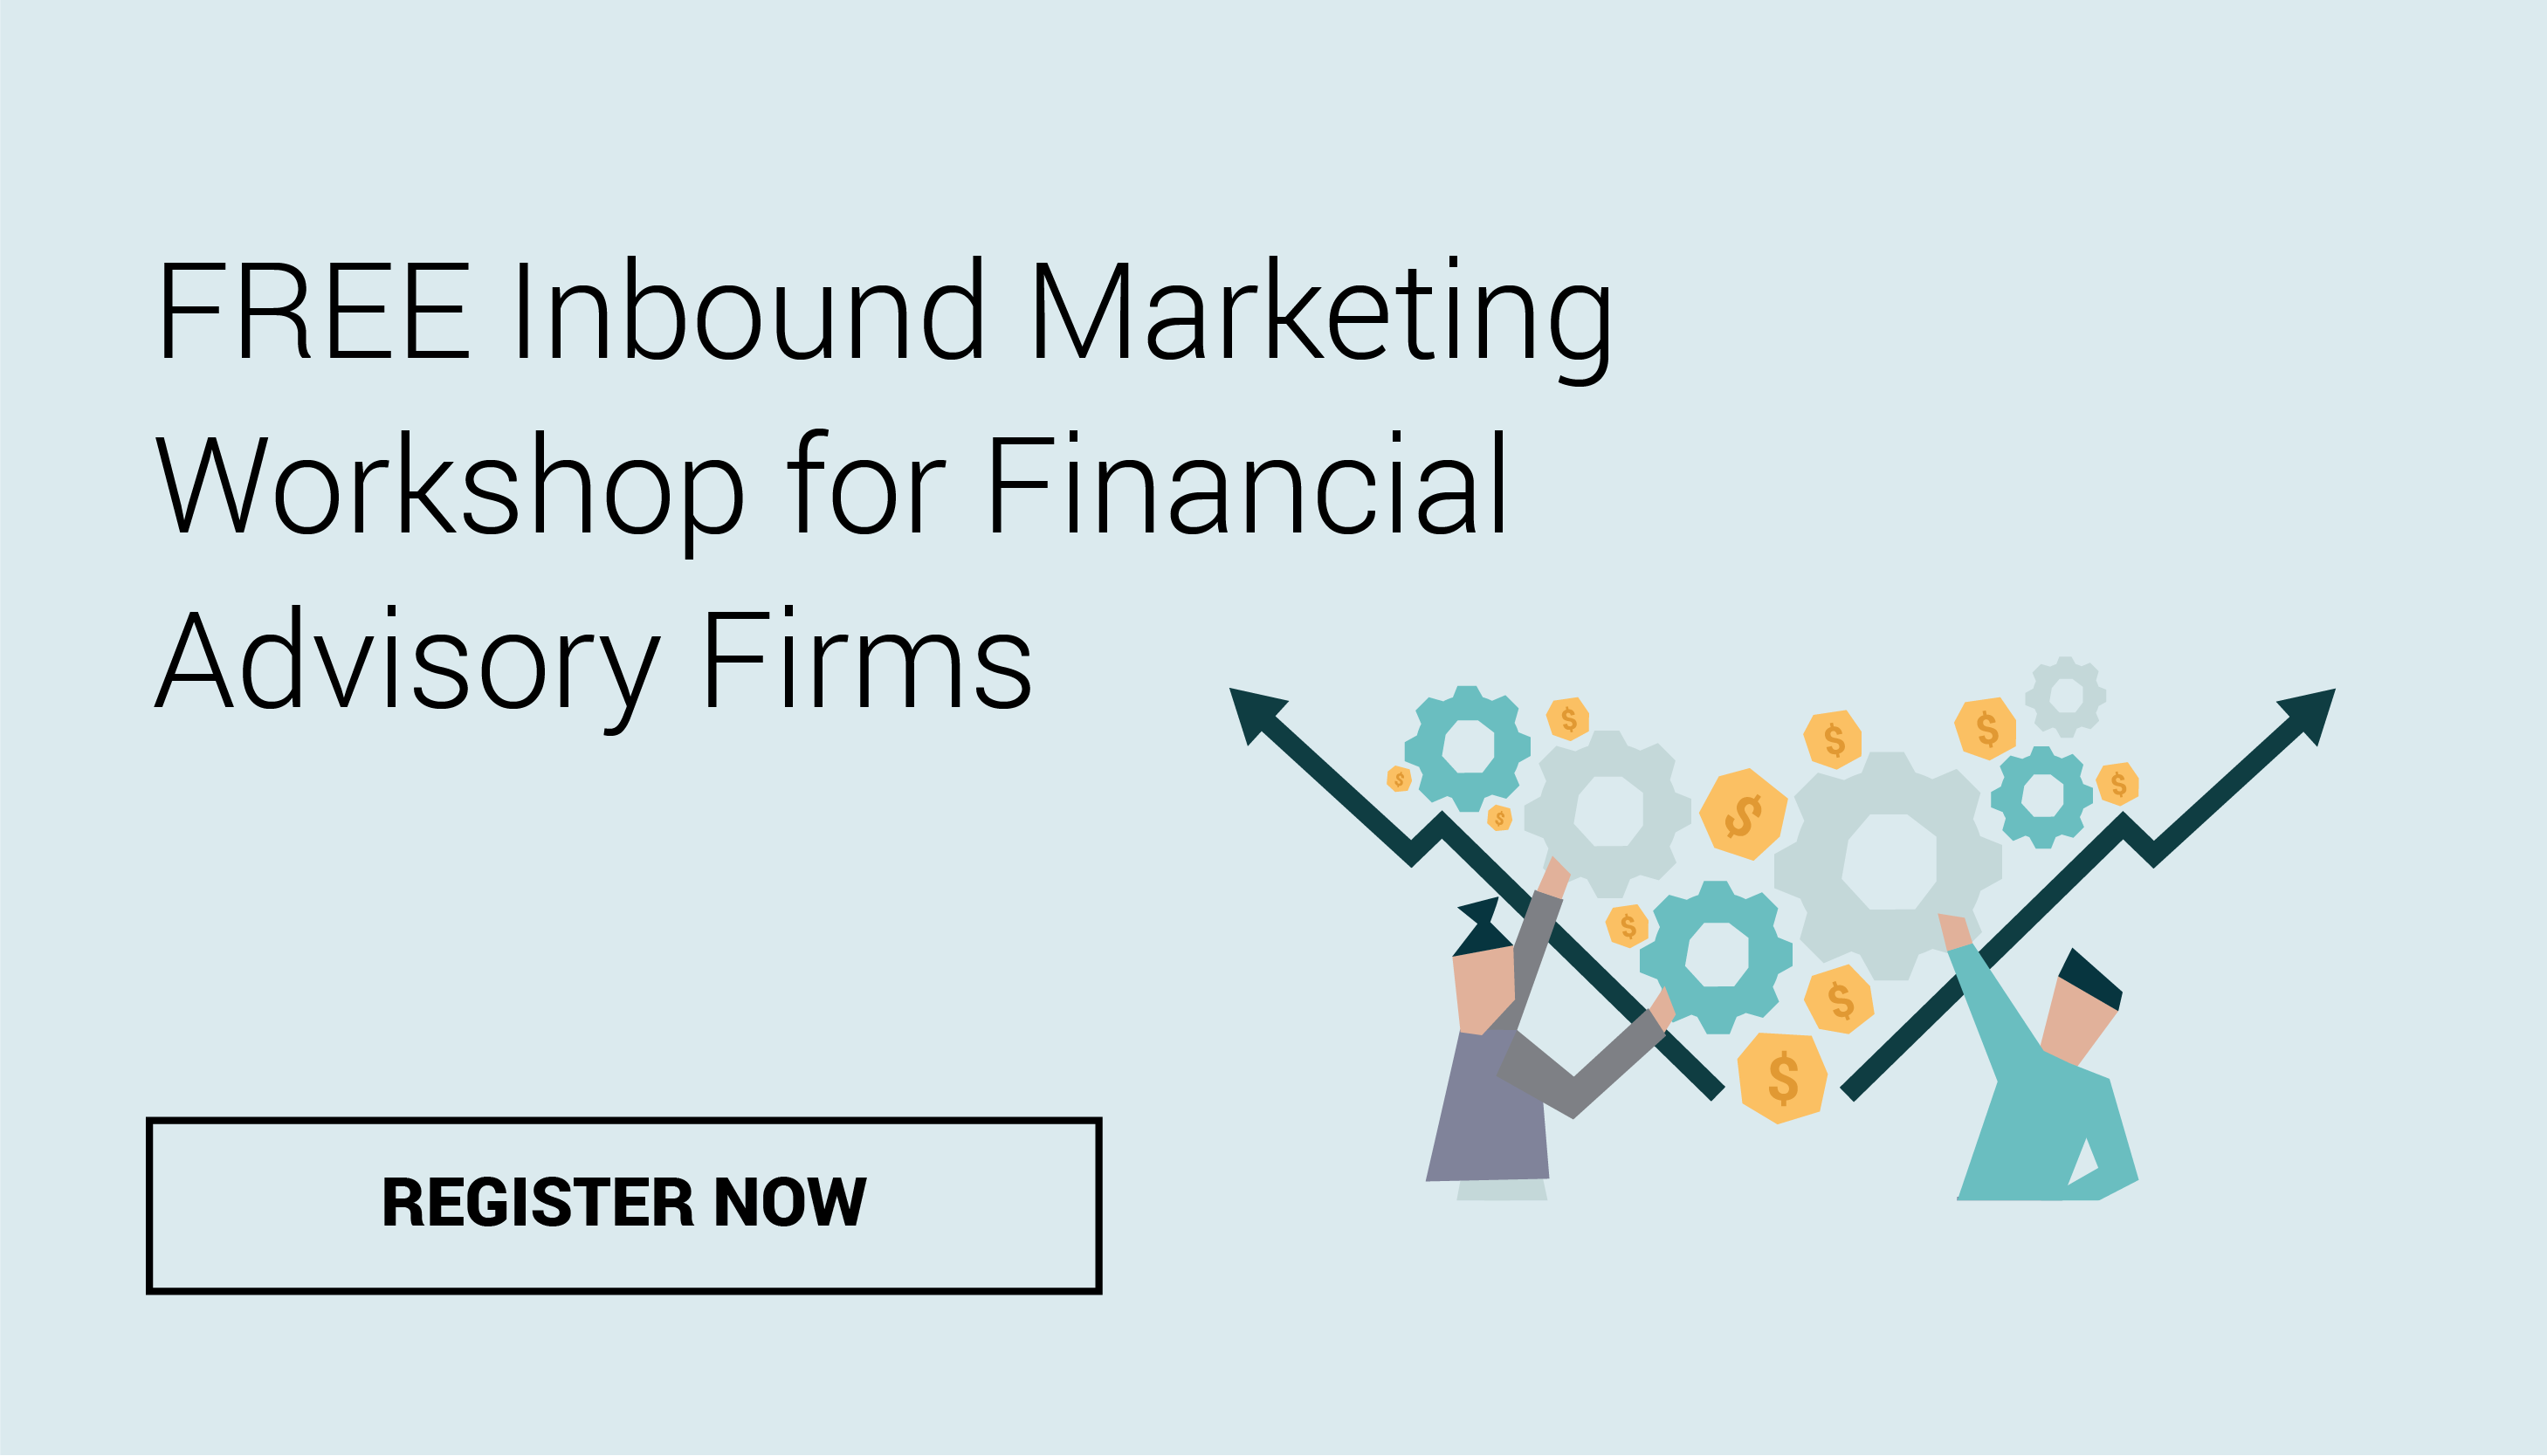 Inbound marketing campaign for financial advisory firms